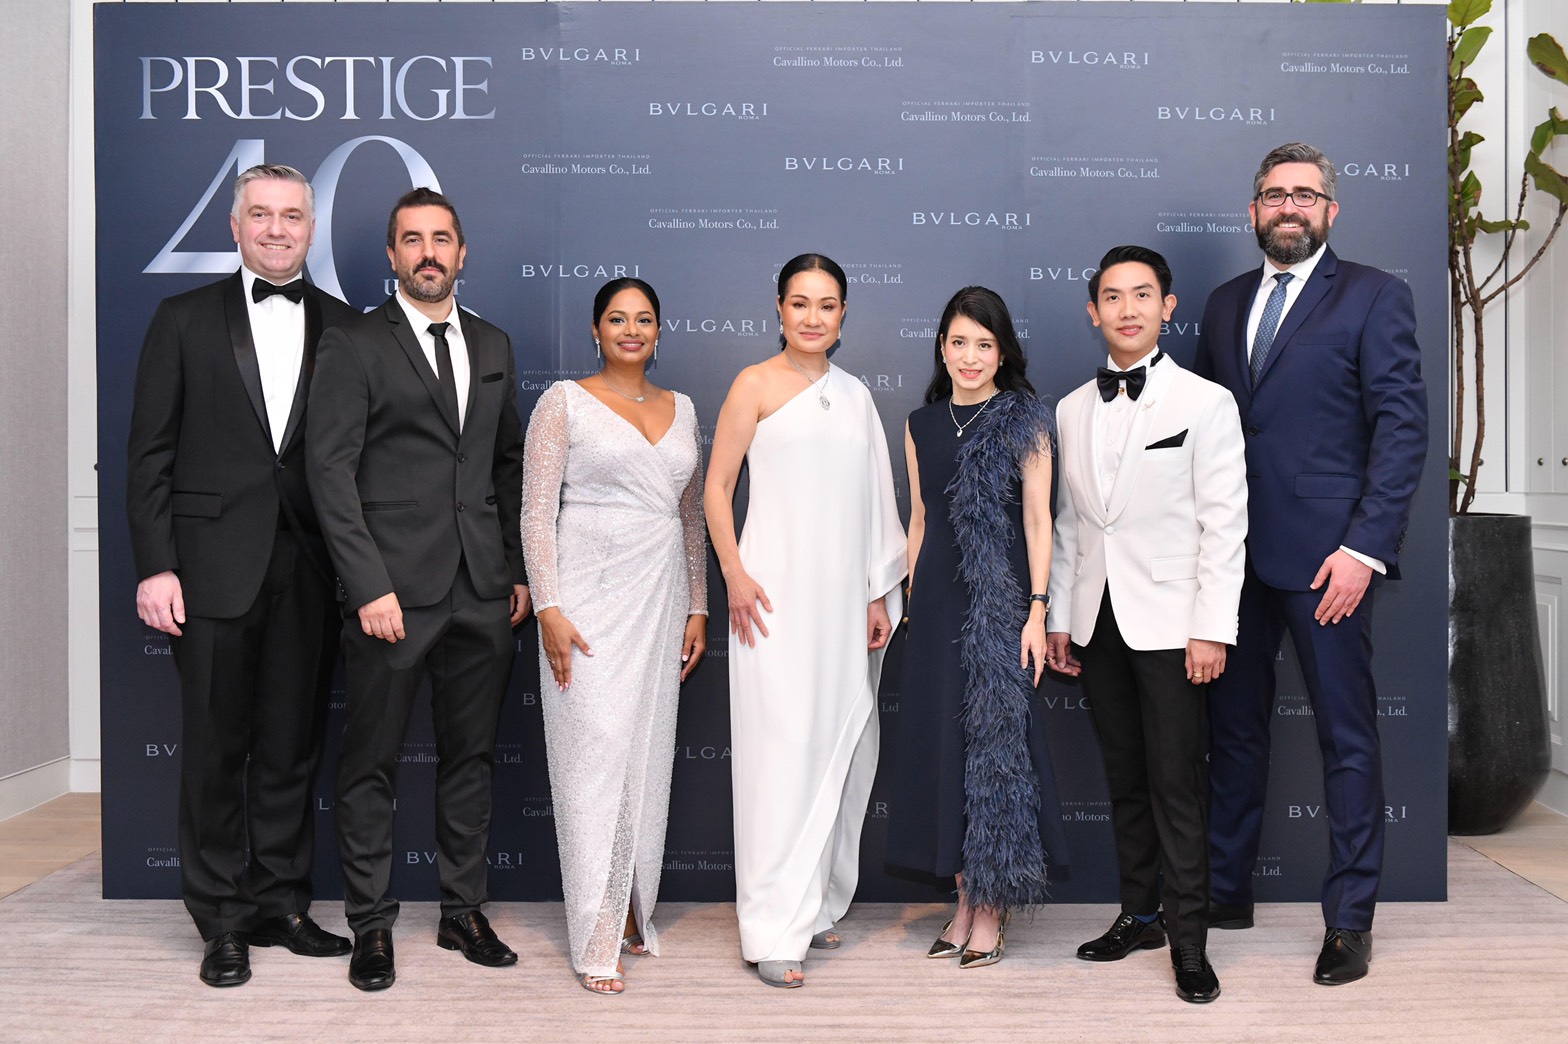 Prestige Magazine Thailand hosted the Prestige 40 Under 40 Event at the Four Seasons Hotel Bangkok, by the Chao Phraya River.